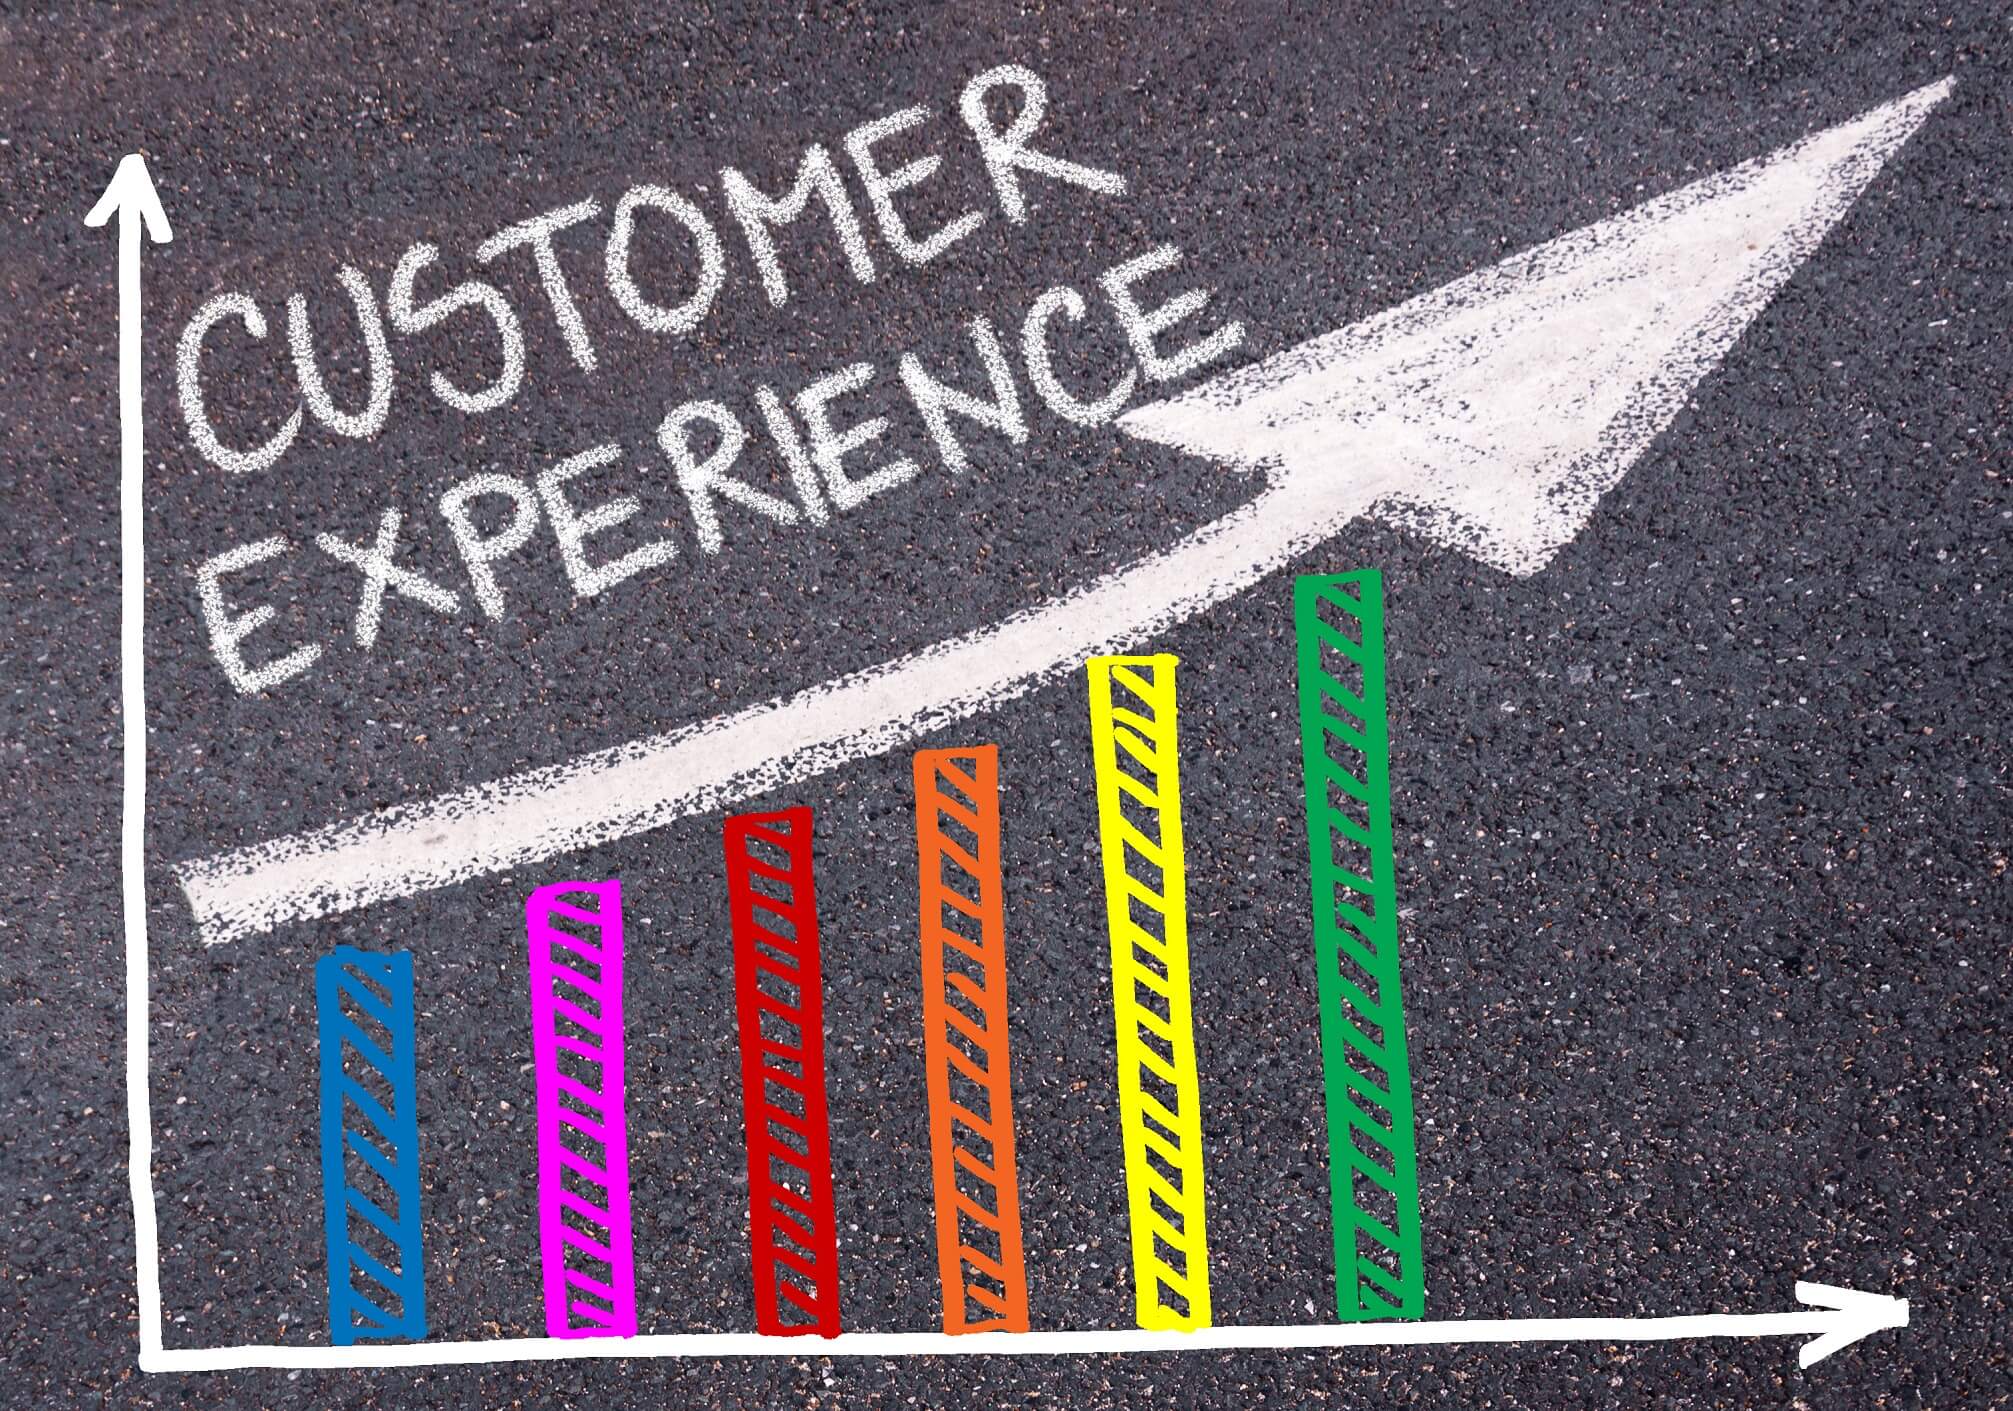 a chart drawn out of chalk on black pavement showing an increase in customer experience